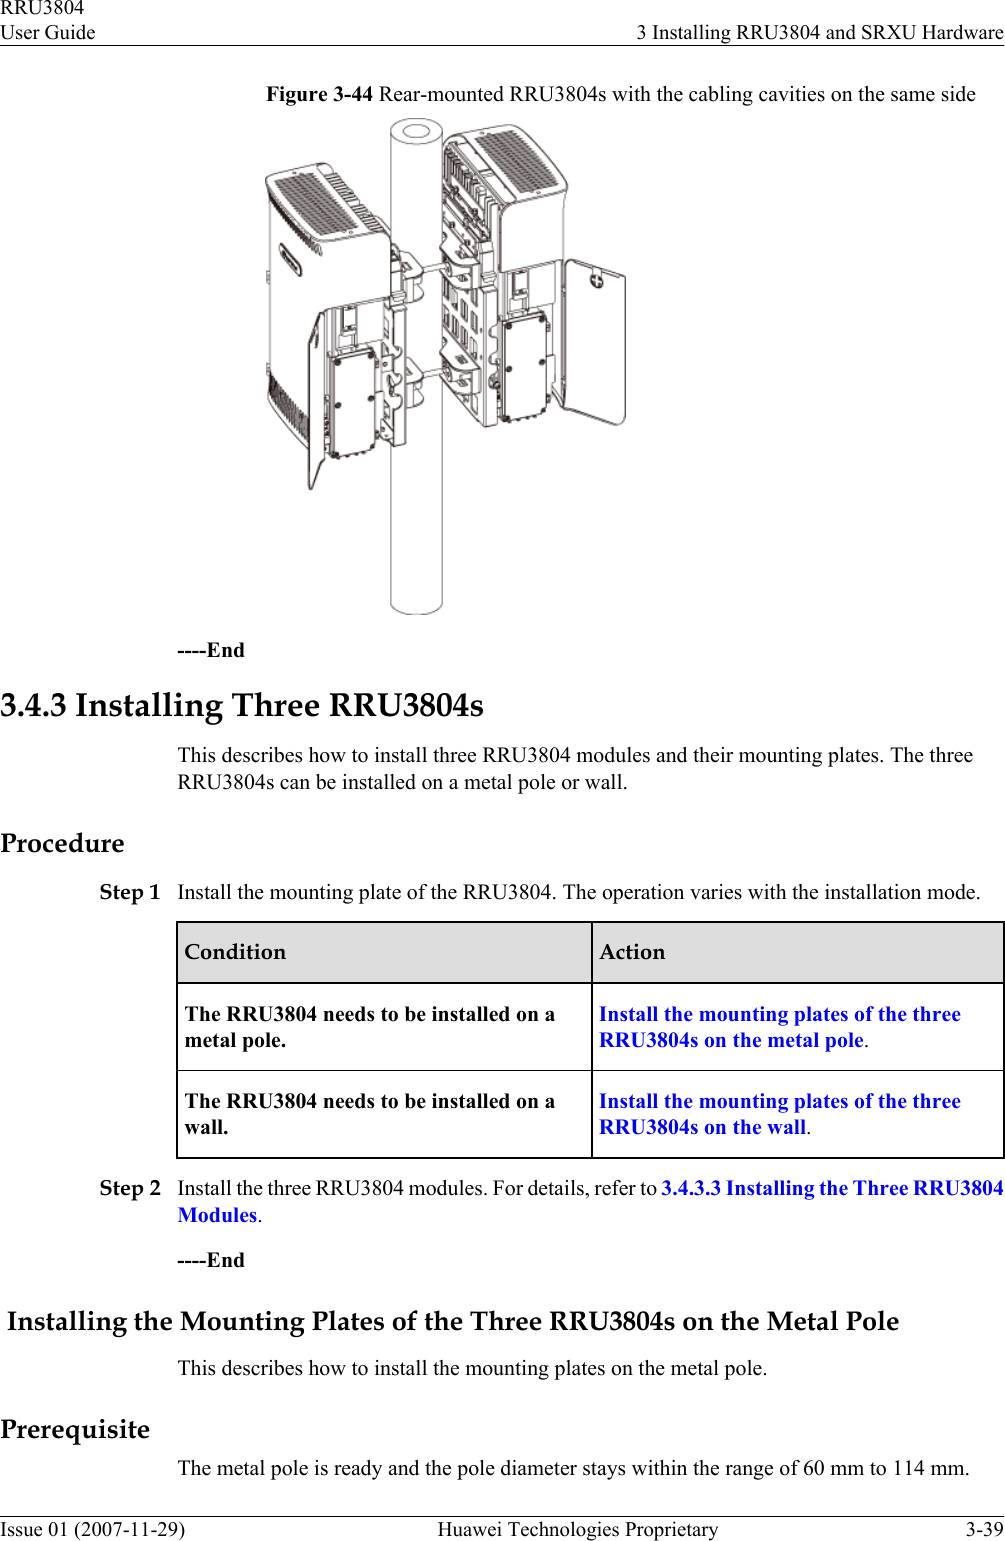 Figure 3-44 Rear-mounted RRU3804s with the cabling cavities on the same side----End3.4.3 Installing Three RRU3804sThis describes how to install three RRU3804 modules and their mounting plates. The threeRRU3804s can be installed on a metal pole or wall.ProcedureStep 1 Install the mounting plate of the RRU3804. The operation varies with the installation mode.Condition ActionThe RRU3804 needs to be installed on ametal pole.Install the mounting plates of the threeRRU3804s on the metal pole.The RRU3804 needs to be installed on awall.Install the mounting plates of the threeRRU3804s on the wall.Step 2 Install the three RRU3804 modules. For details, refer to 3.4.3.3 Installing the Three RRU3804Modules.----End Installing the Mounting Plates of the Three RRU3804s on the Metal PoleThis describes how to install the mounting plates on the metal pole.PrerequisiteThe metal pole is ready and the pole diameter stays within the range of 60 mm to 114 mm.RRU3804User Guide 3 Installing RRU3804 and SRXU HardwareIssue 01 (2007-11-29)  Huawei Technologies Proprietary 3-39